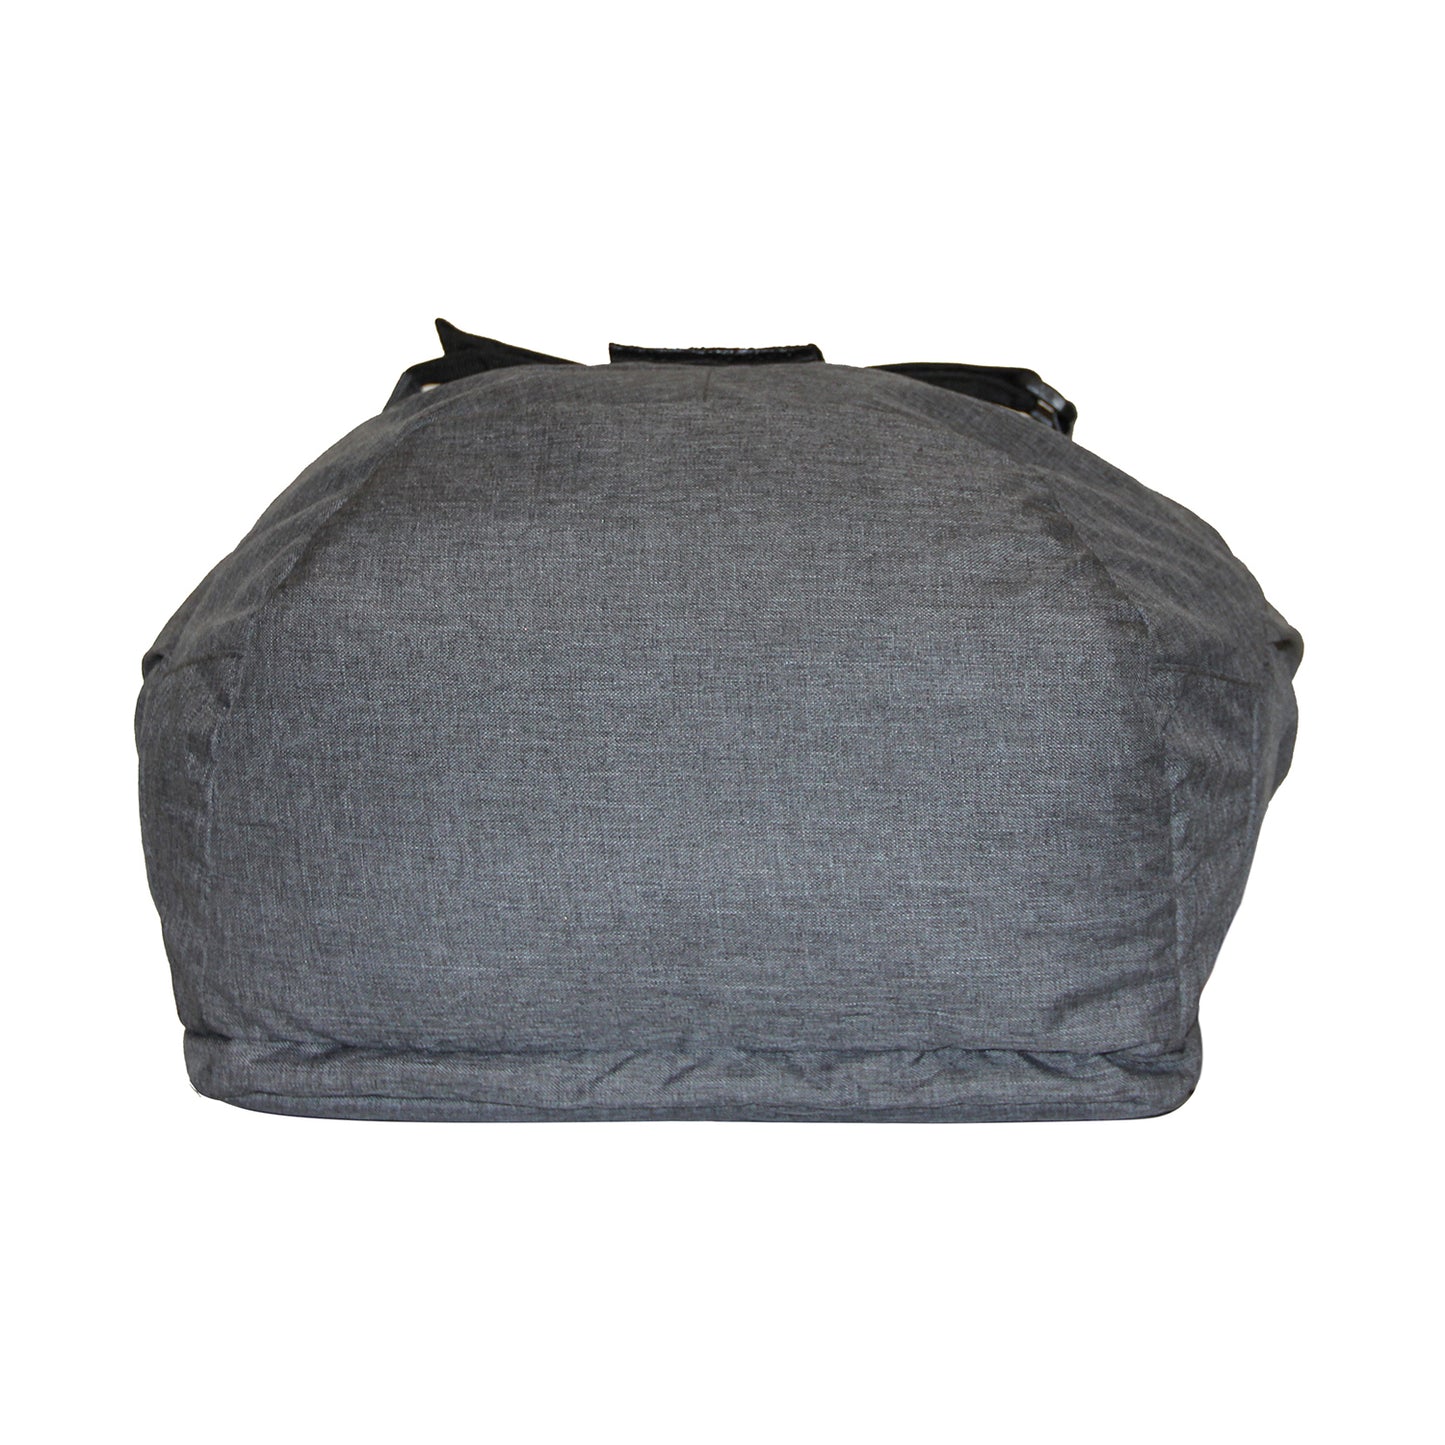 Grey Casual Backpack